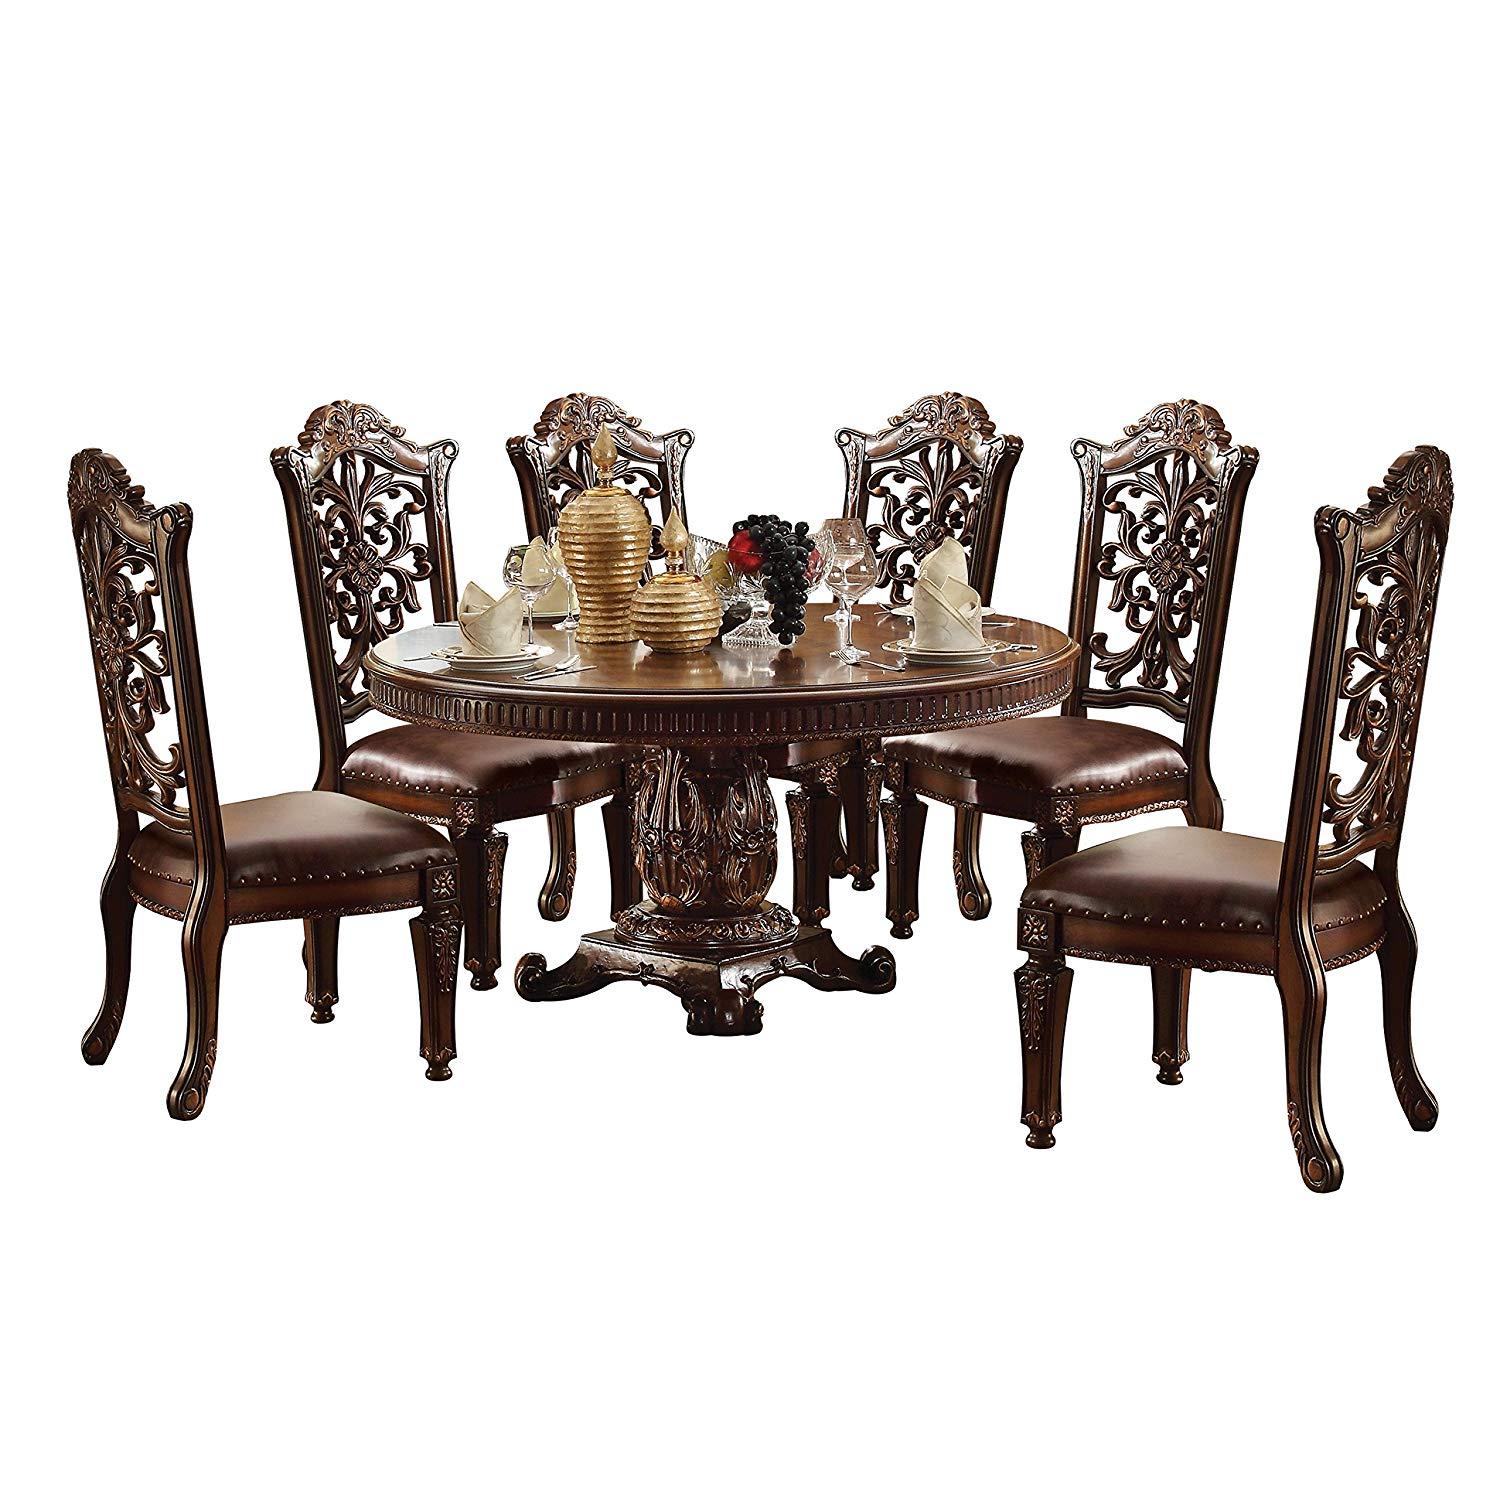 Classic, Traditional Dining Table Set Vendome 62015 62015 Vendome-Set-7 in Cherry Polyurethane